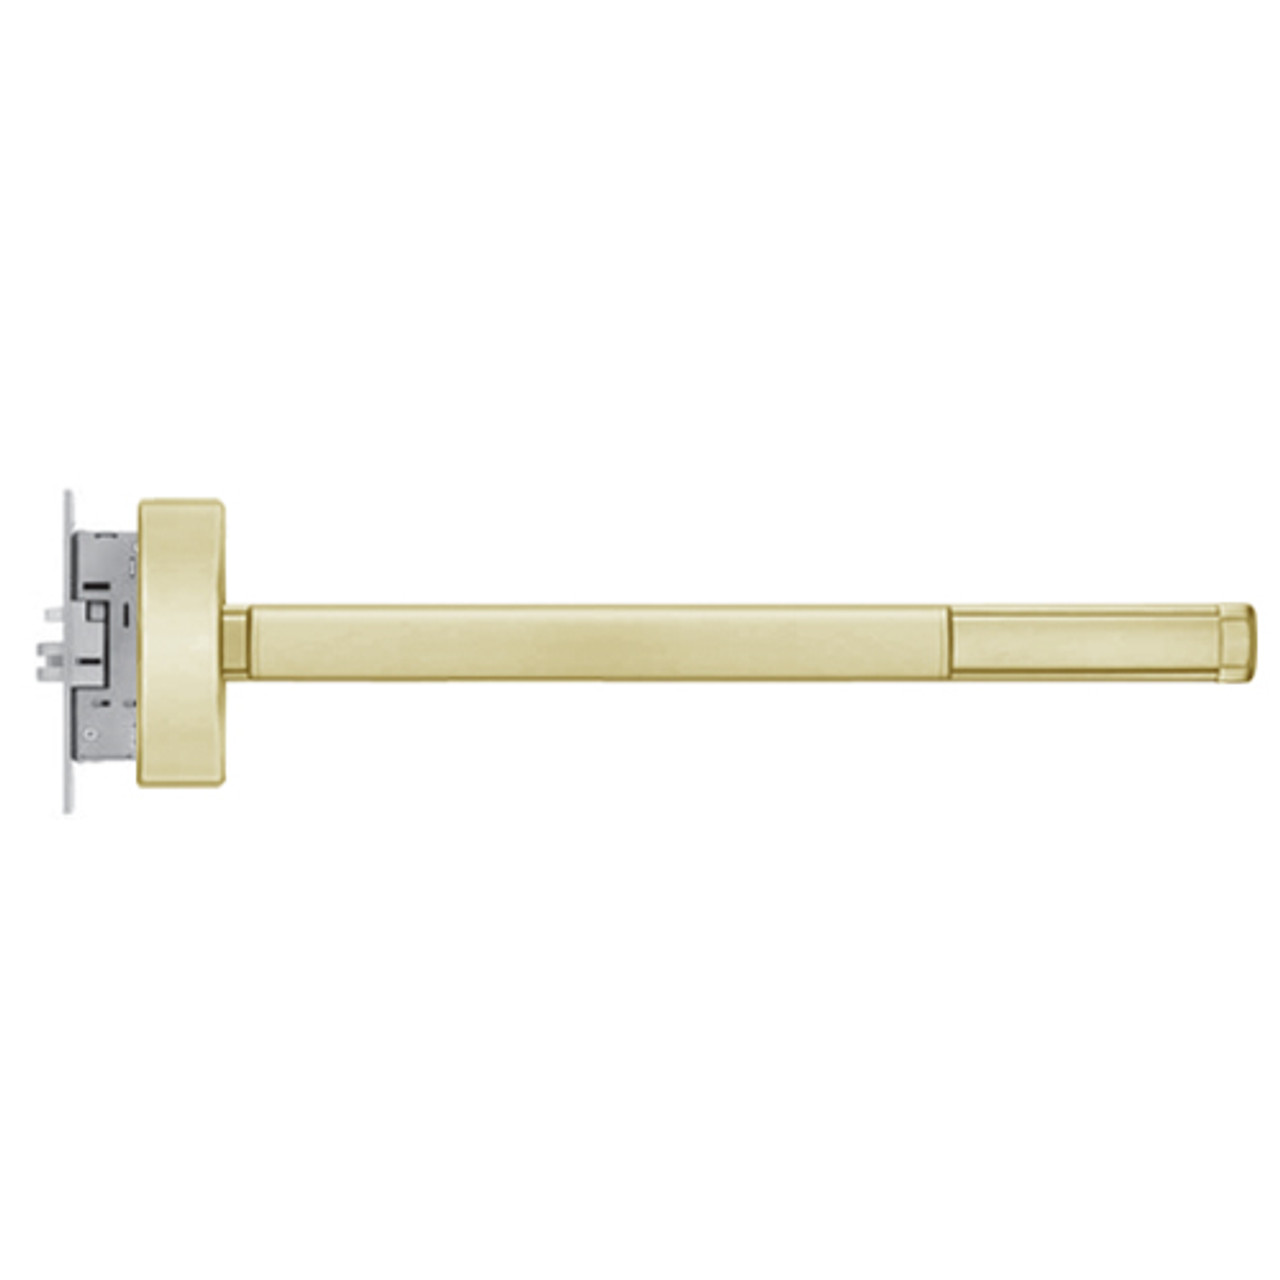 MLR2305-LHR-606-48 PHI 2300 Series Apex Mortise Exit Device with Motorized Latch Retraction Prepped for Key Controls Thumb Piece in Satin Brass Finish